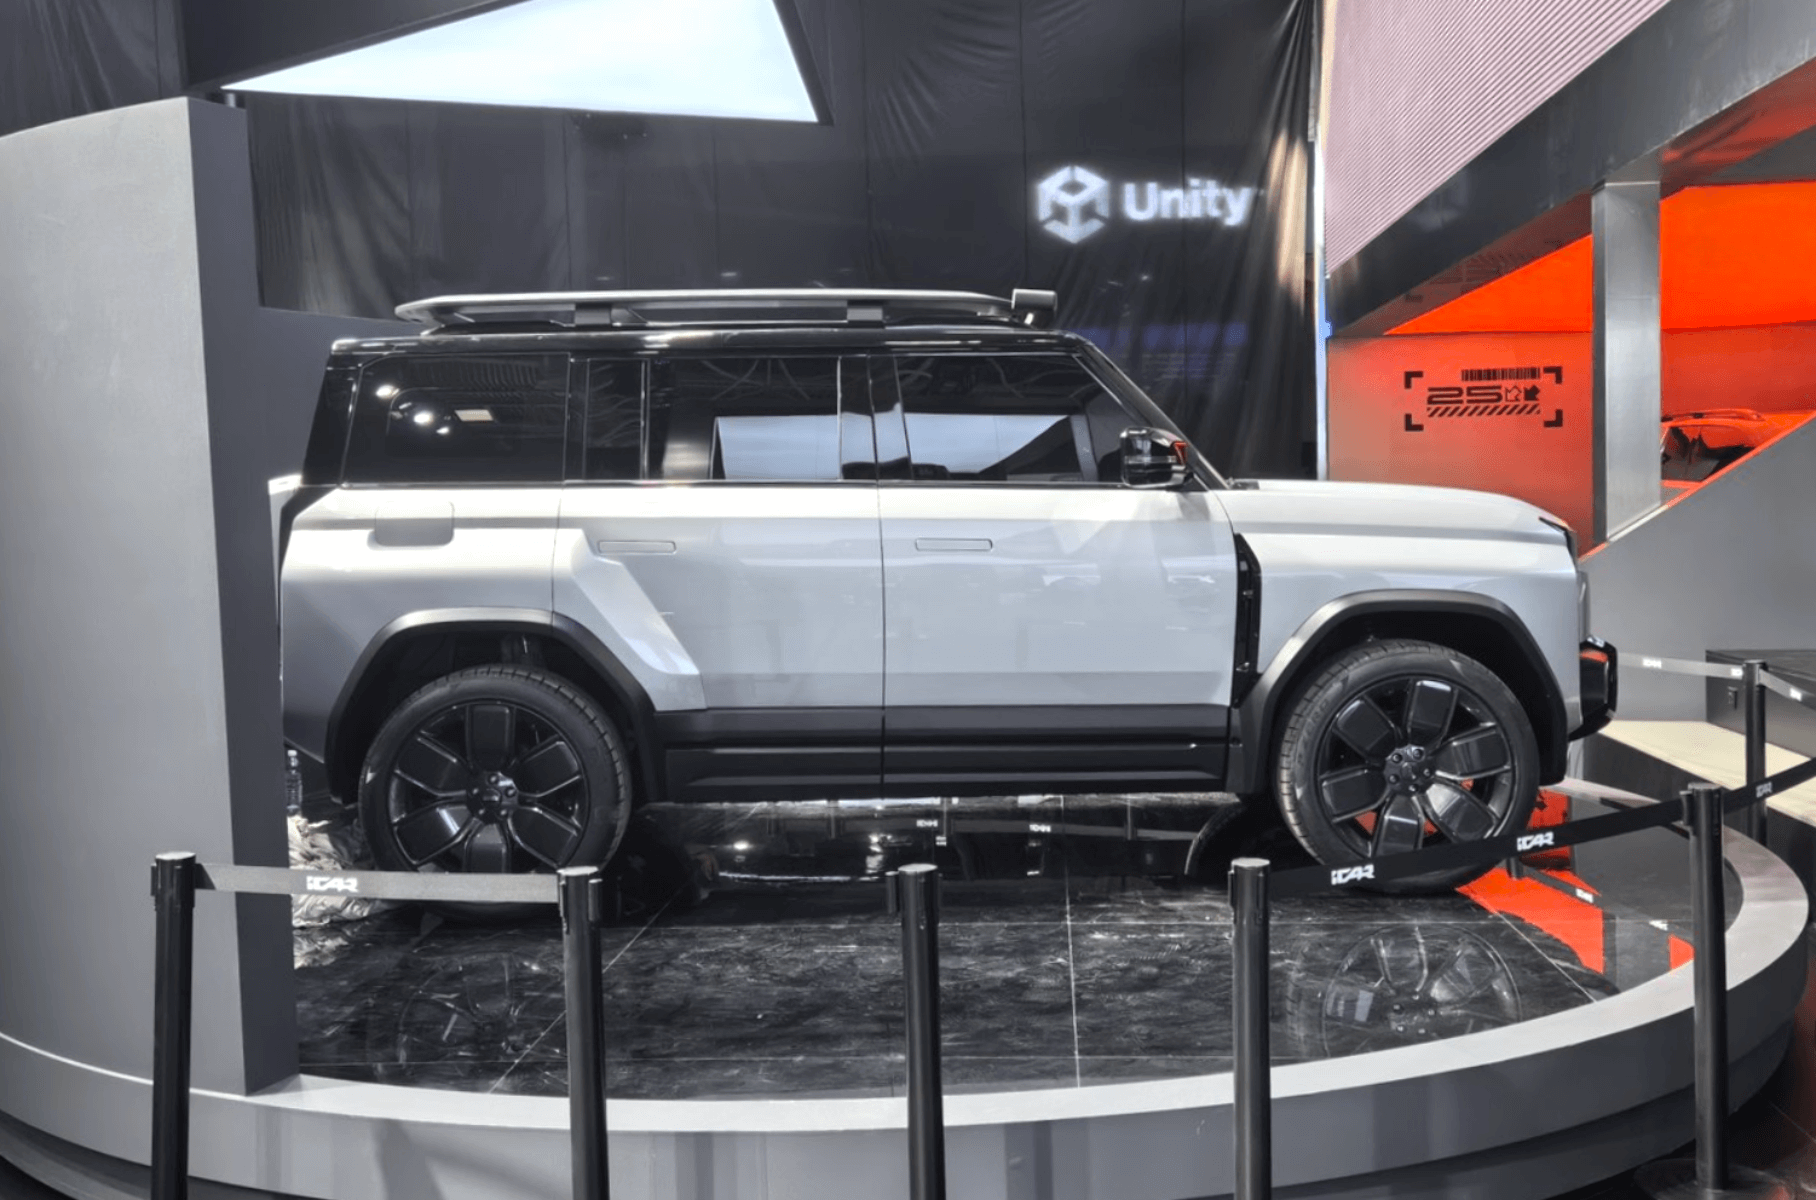 Chery showed an off-road version of the electric iCar 03